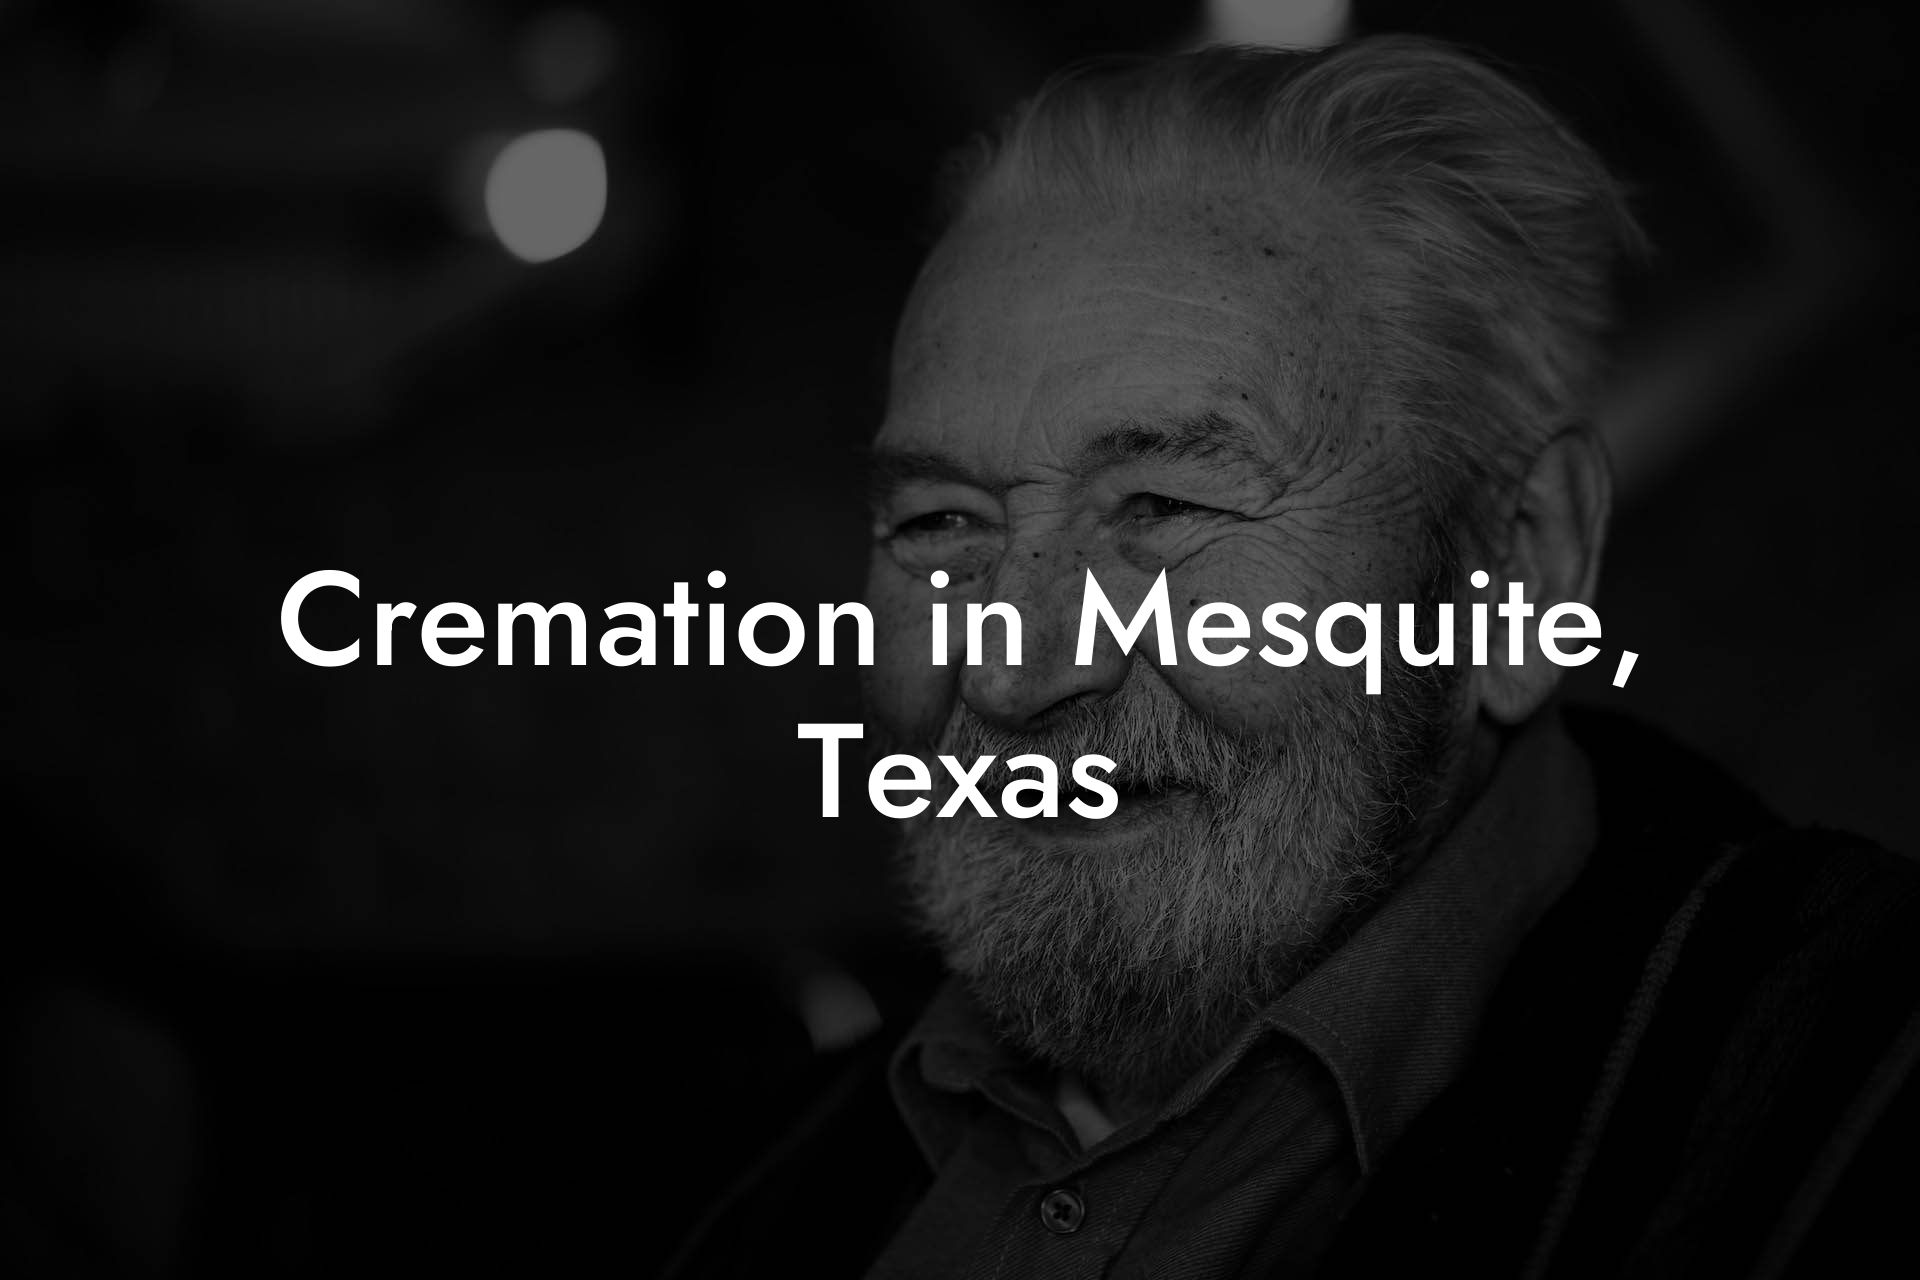 Cremation in Mesquite, Texas